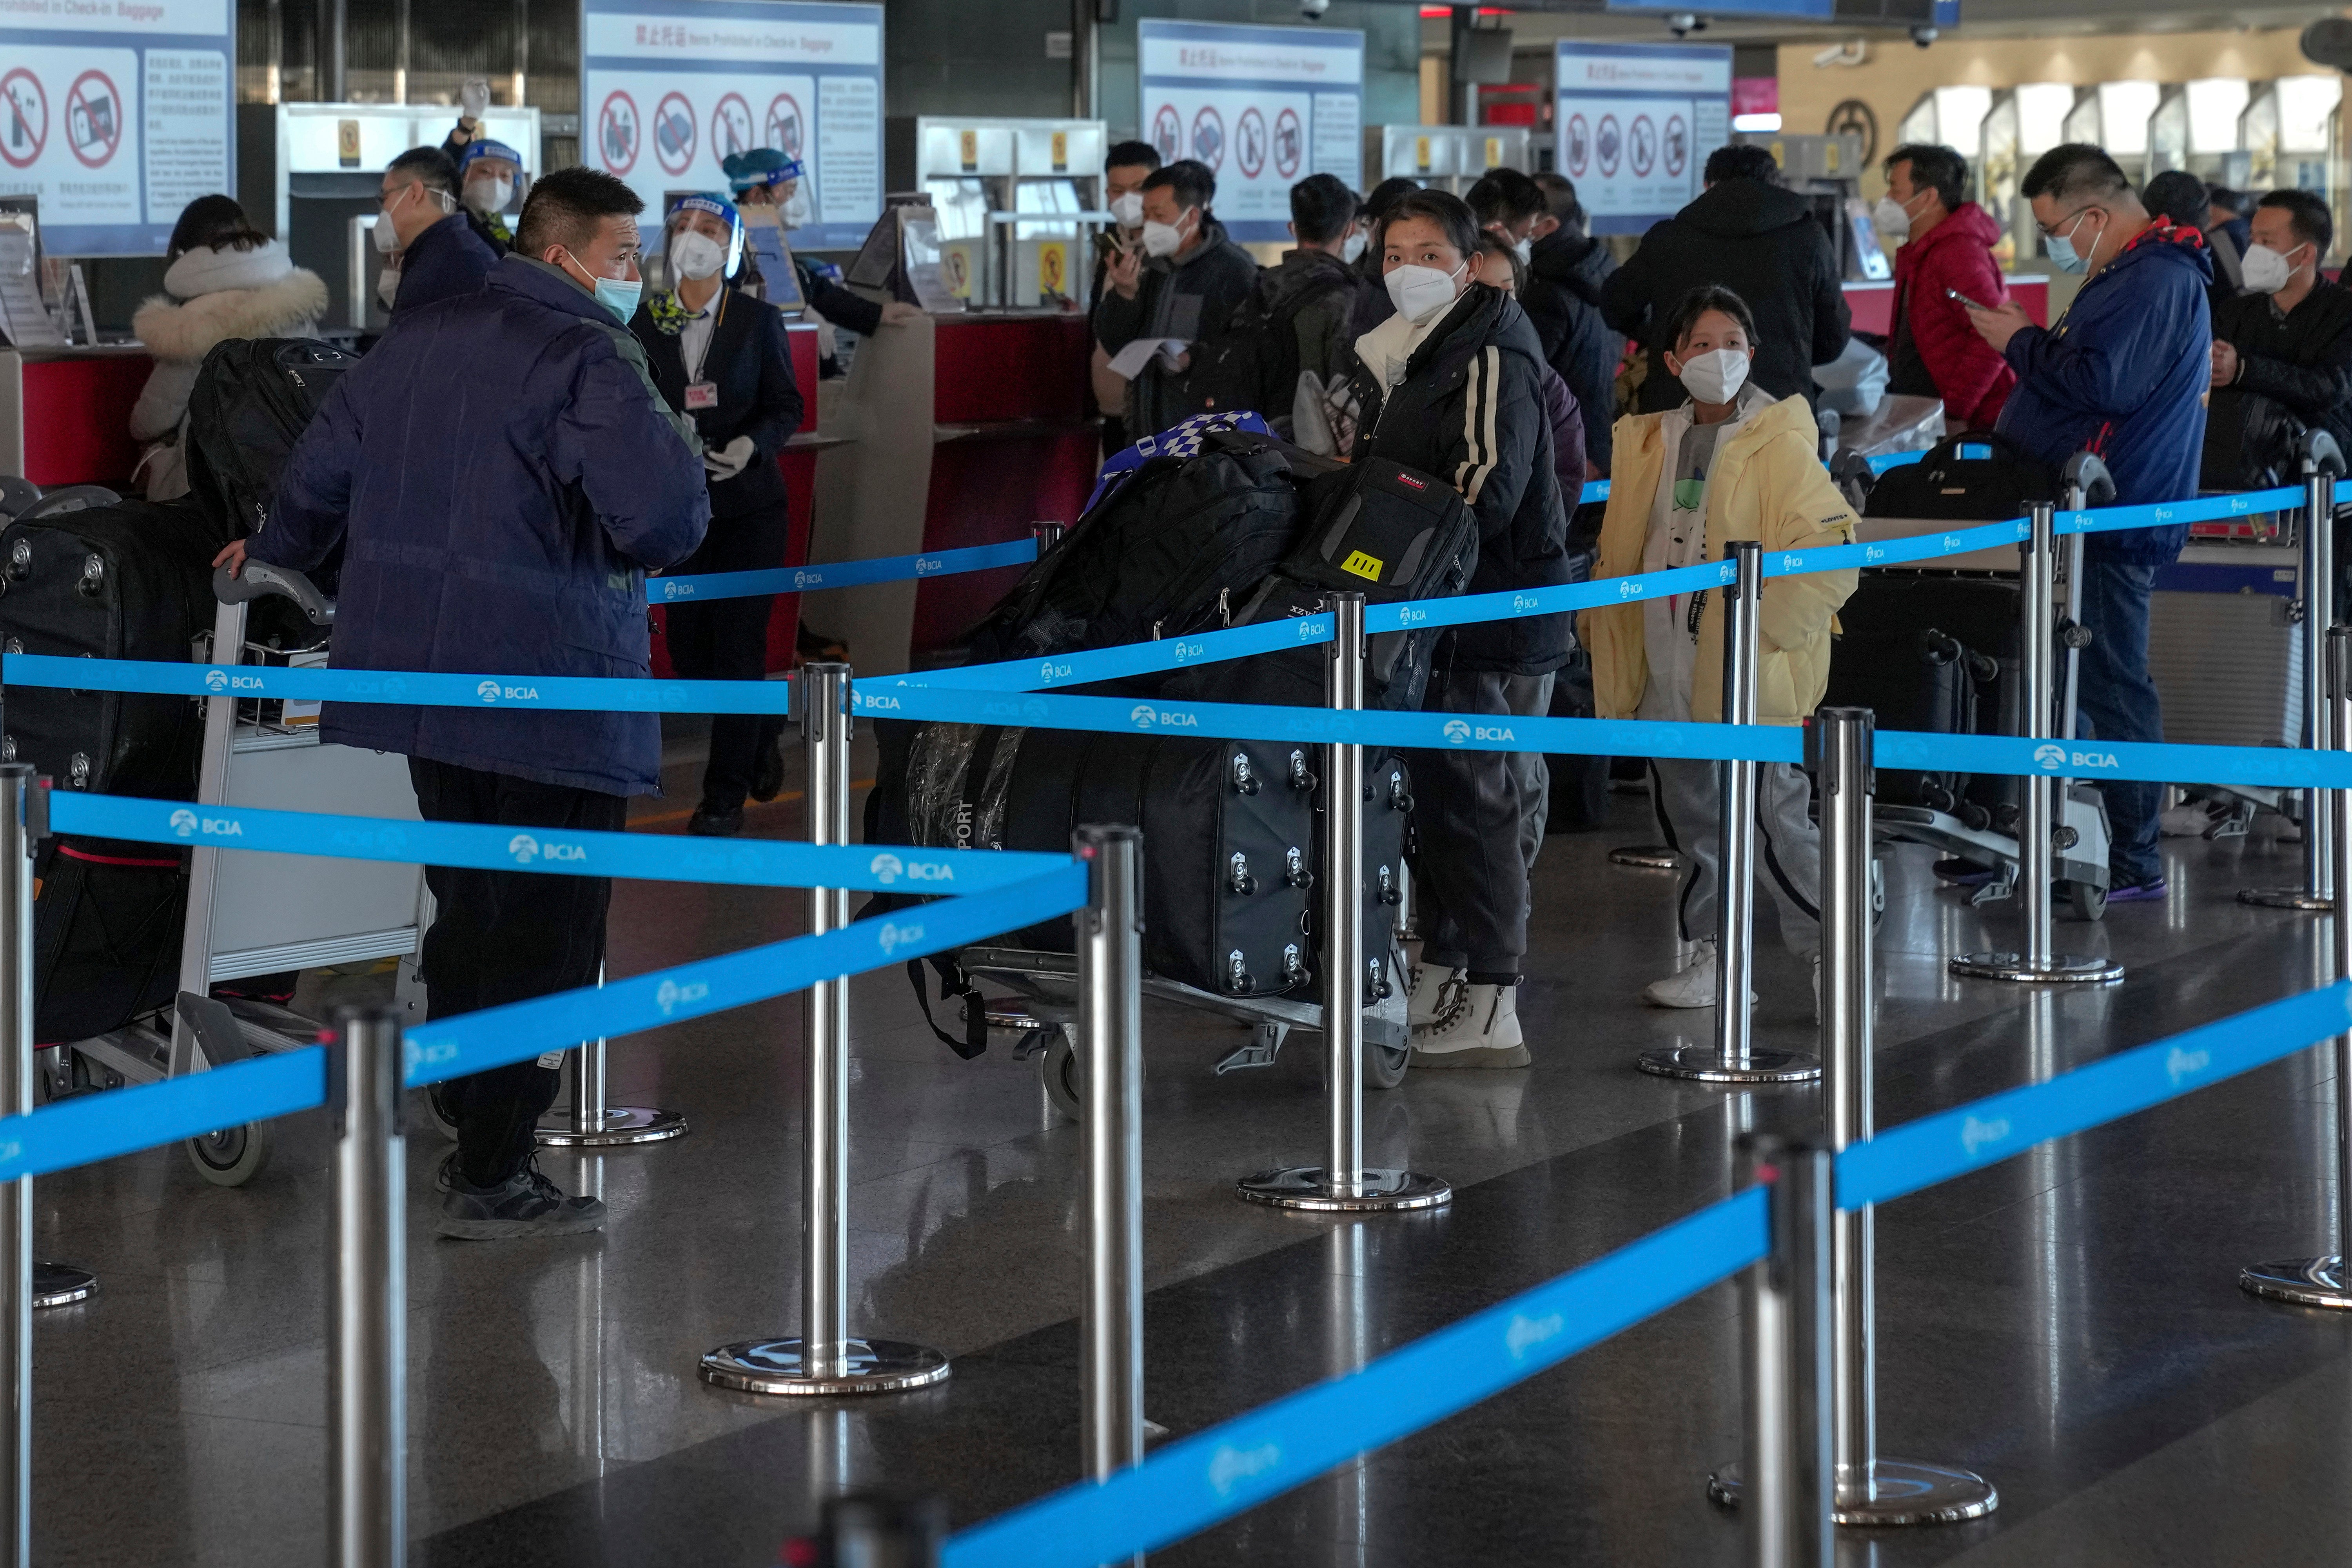 Masked travellers with luggage line up at the international flight check in counter at the Beijing Capital International Airport